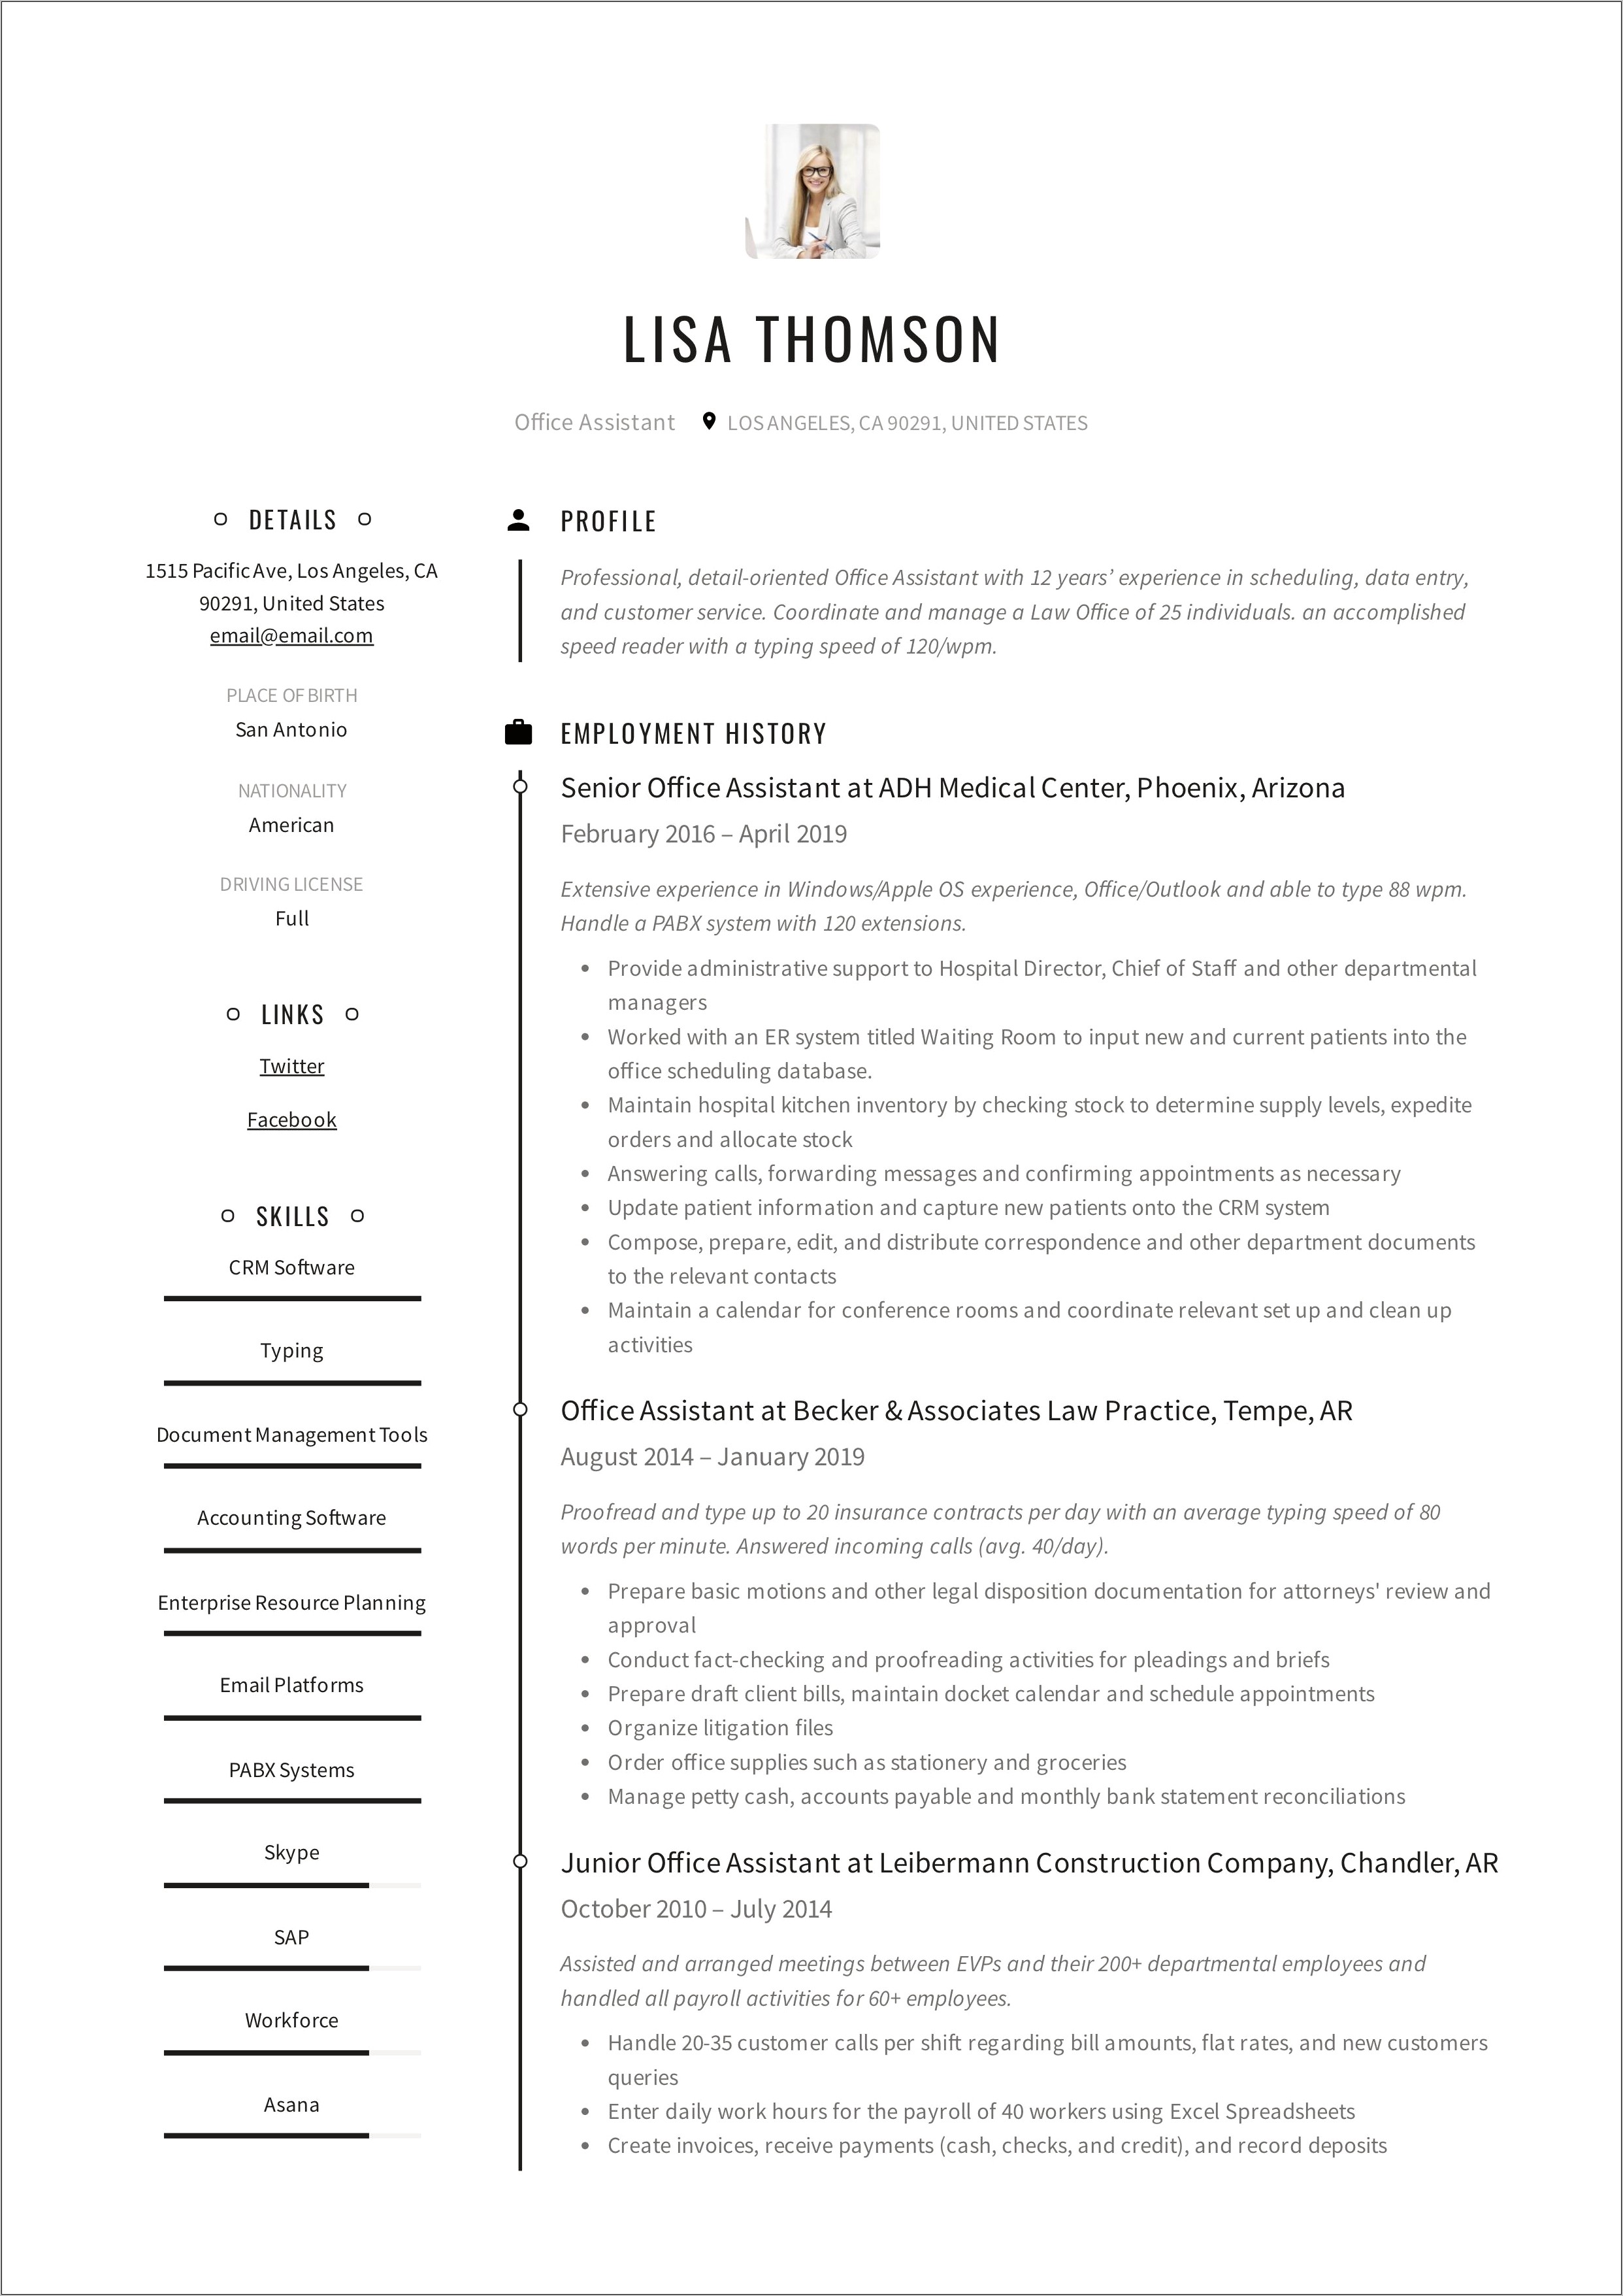 Sample Resume For Construction Administrative Assistant